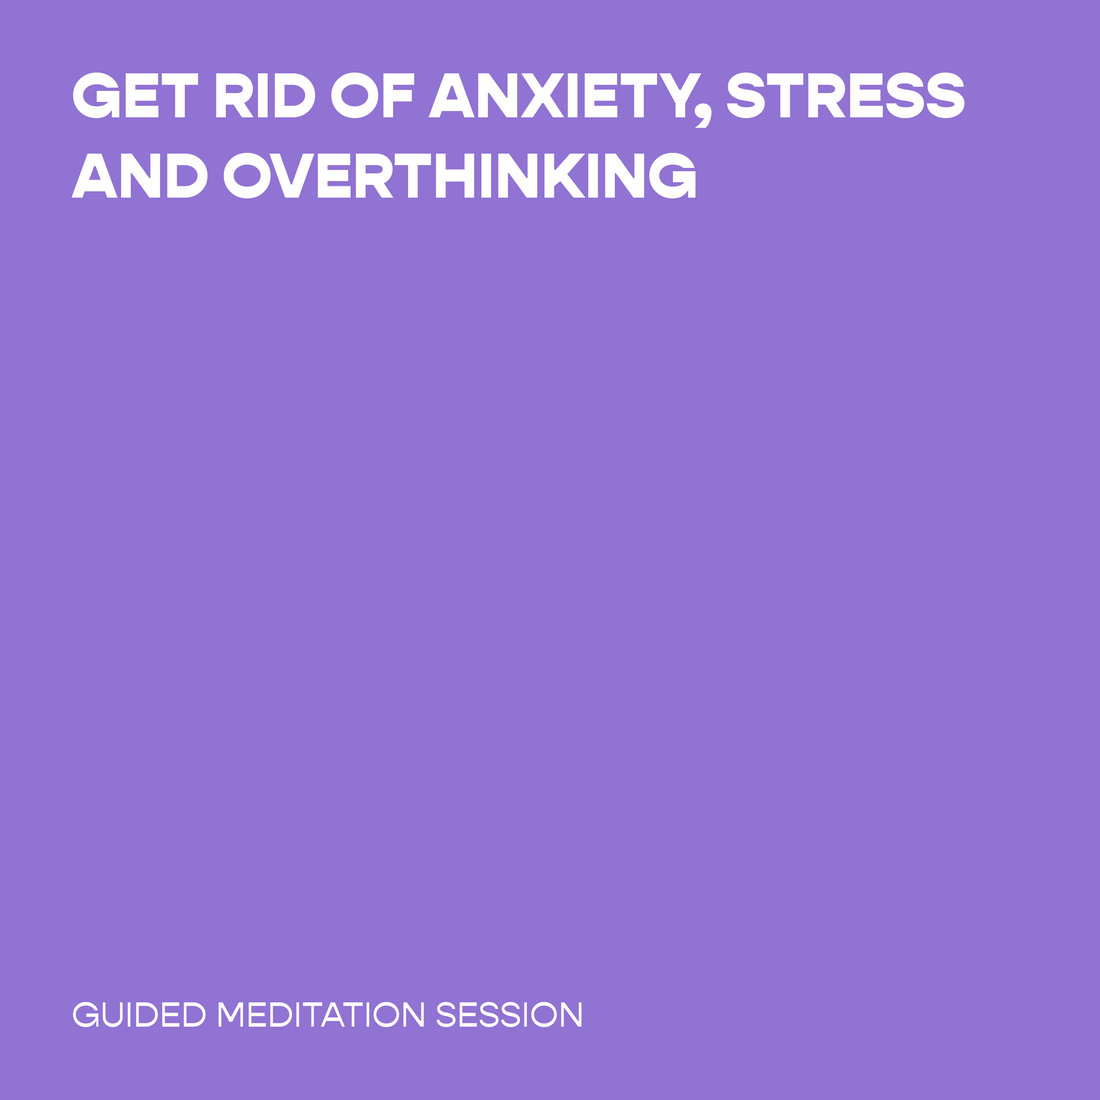 Get Rid of Anxiety, Stress and Overthinking